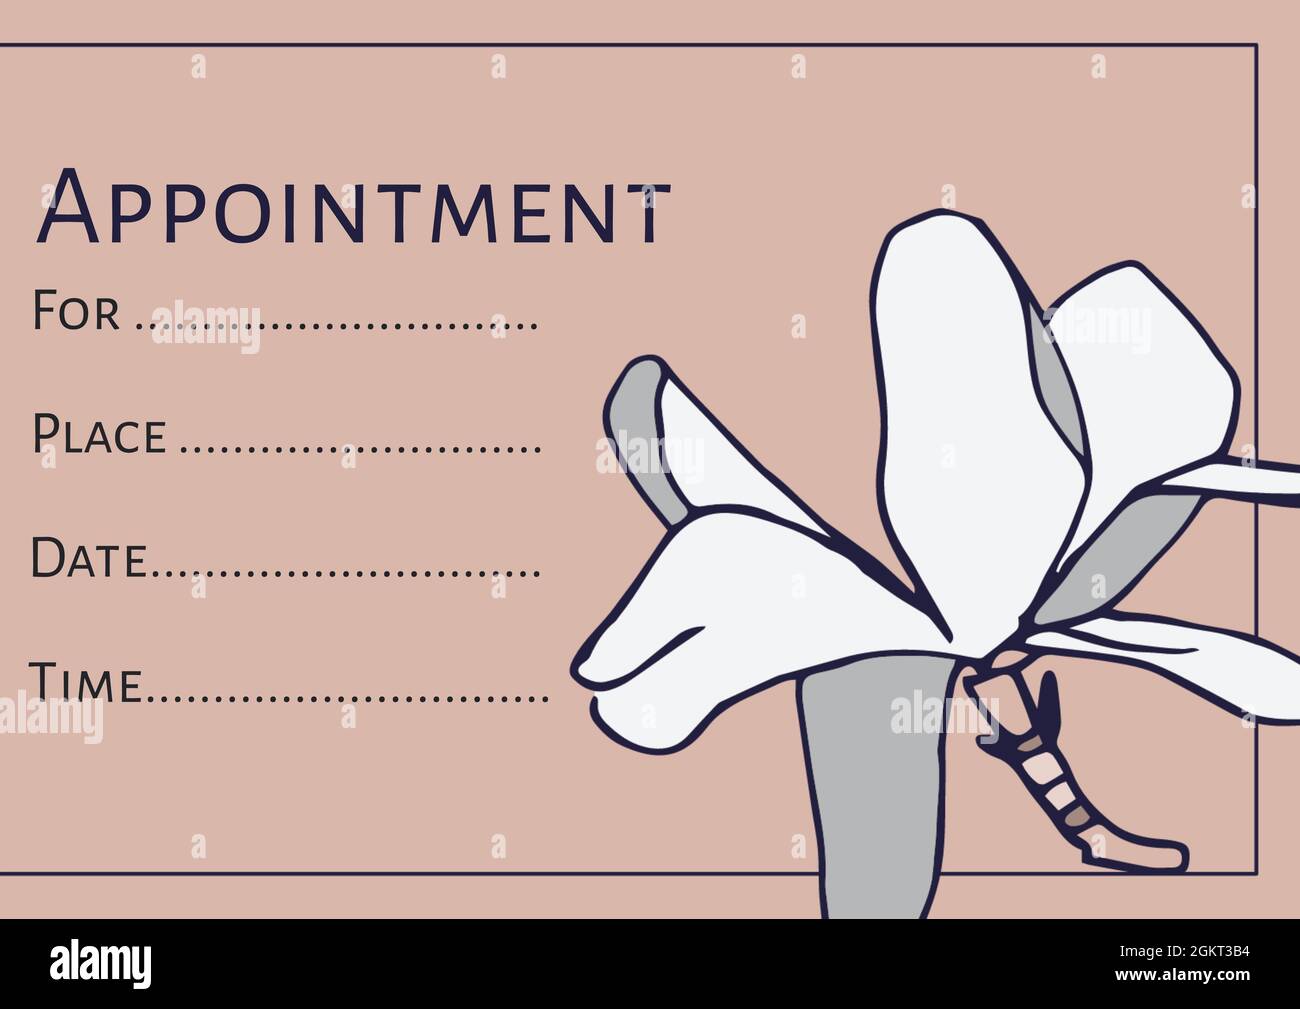 Flower icon and appointment text with copy space on pink background Stock Photo